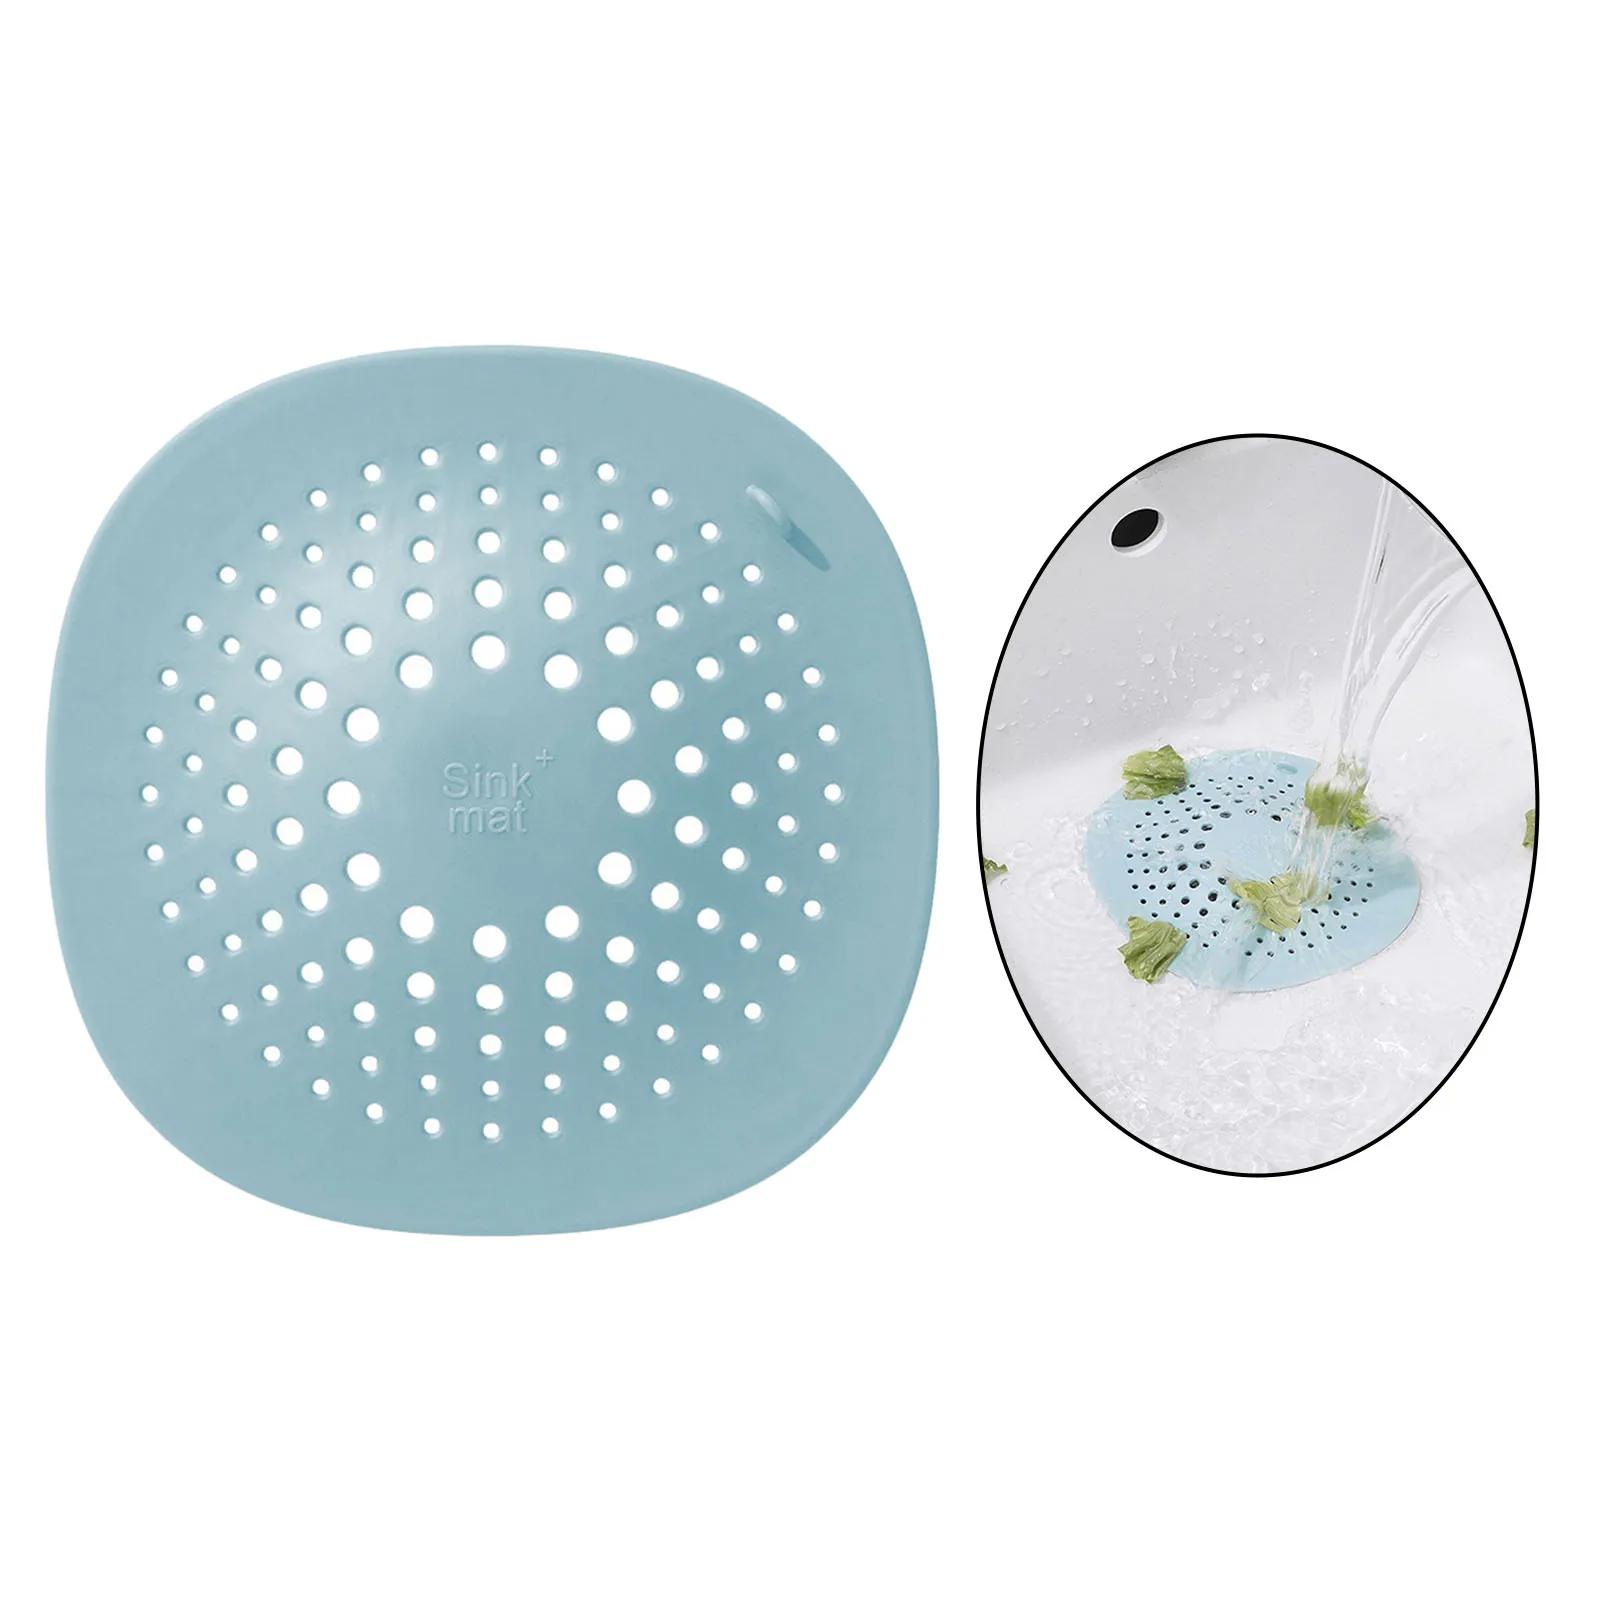 Kitchen Drain Hair Catcher w/Suction Cups Bath Stopper Sink Strainer Water Trap Cover Flexible